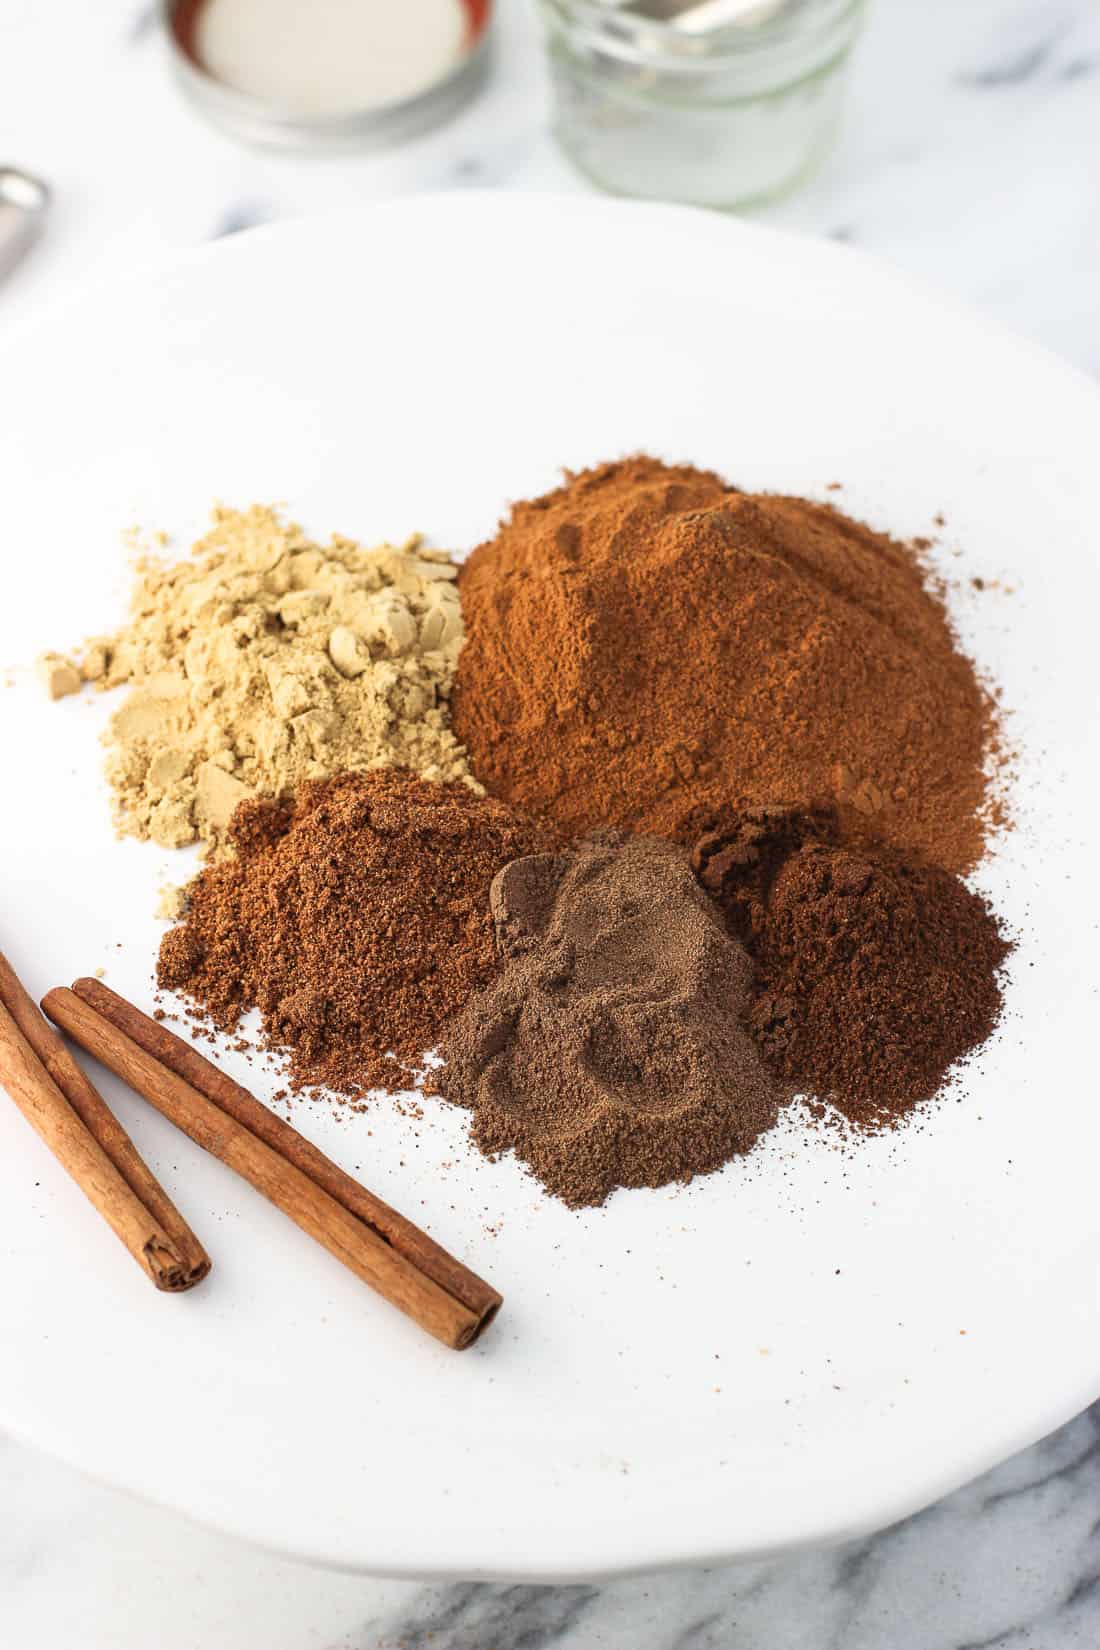 Five piles of ground spices on a ceramic plate next to two whole cinnamon sticks